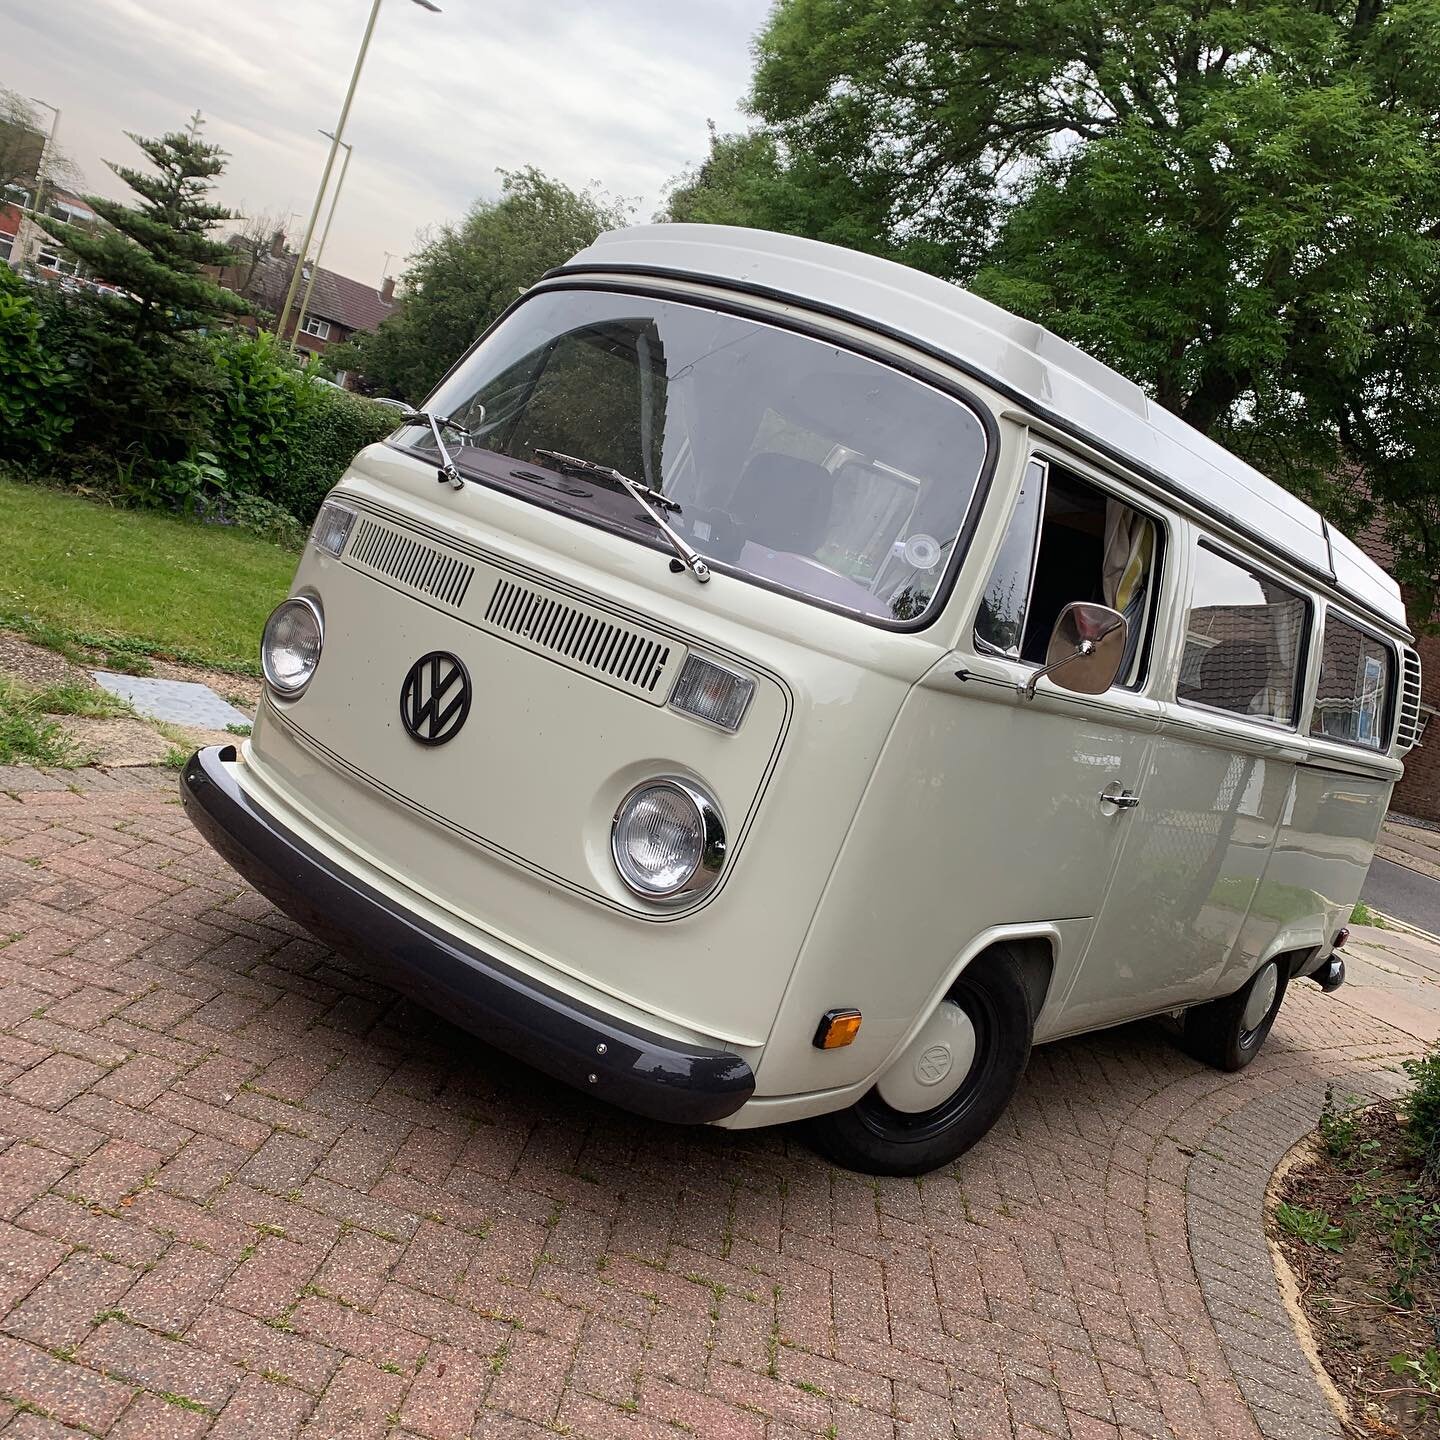 Who is heading to Hitchin for the H-town classic and dub meet tonight? #hitchin #hvsuk #ccruk #classiccarstorage #baywindow #vwtype2 #htowndubandclassicclub #aircooled #vwwestfalia #mightbeforsale #classicvw